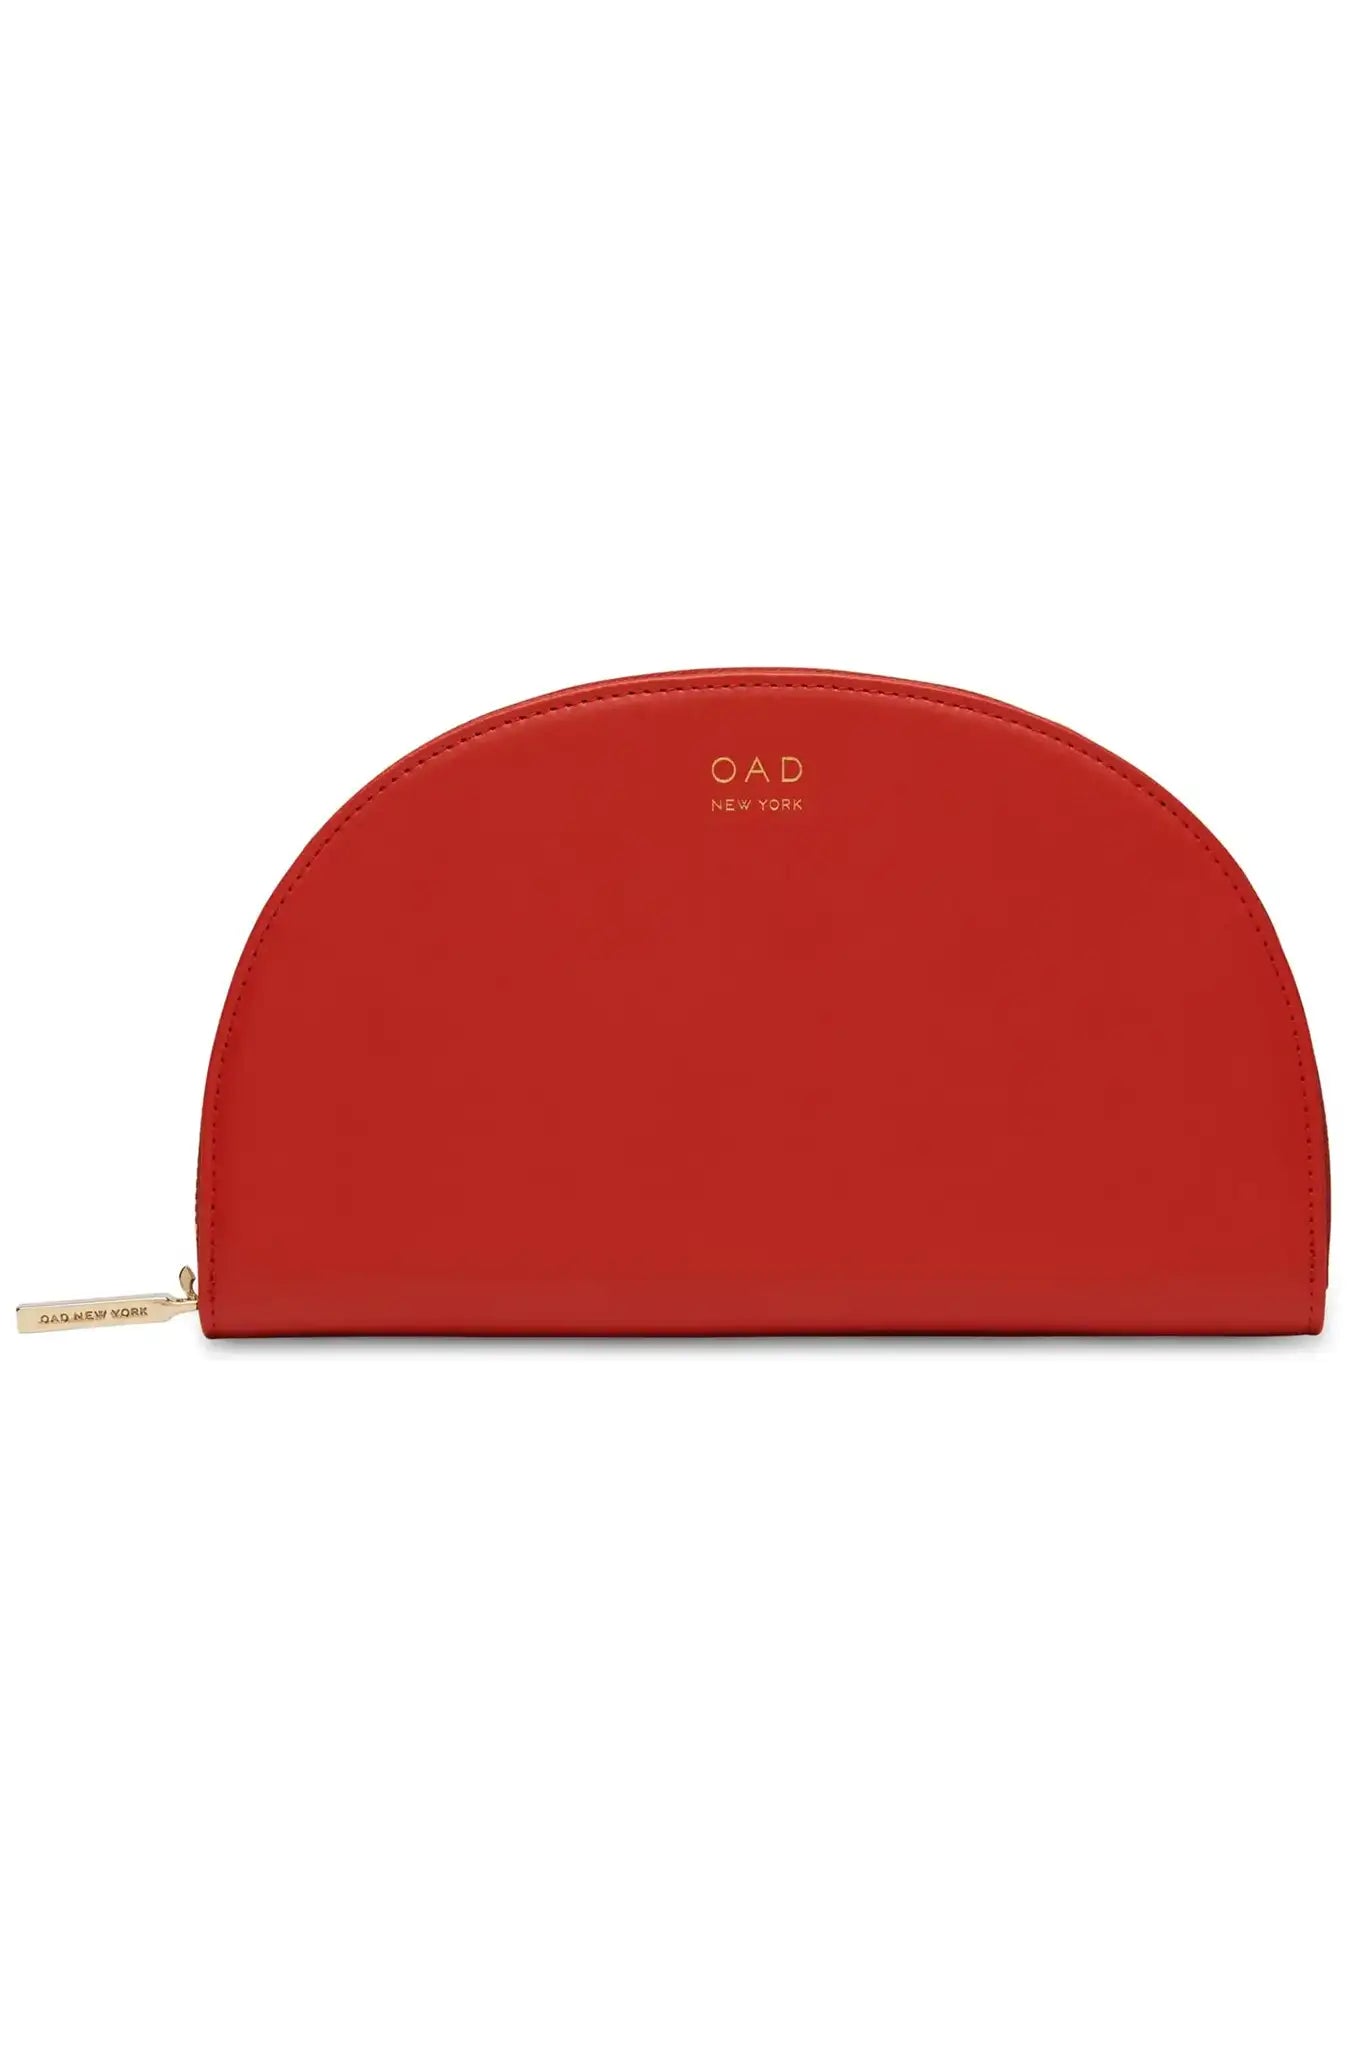 OAD Dia Continental Mirror Wallet - Red